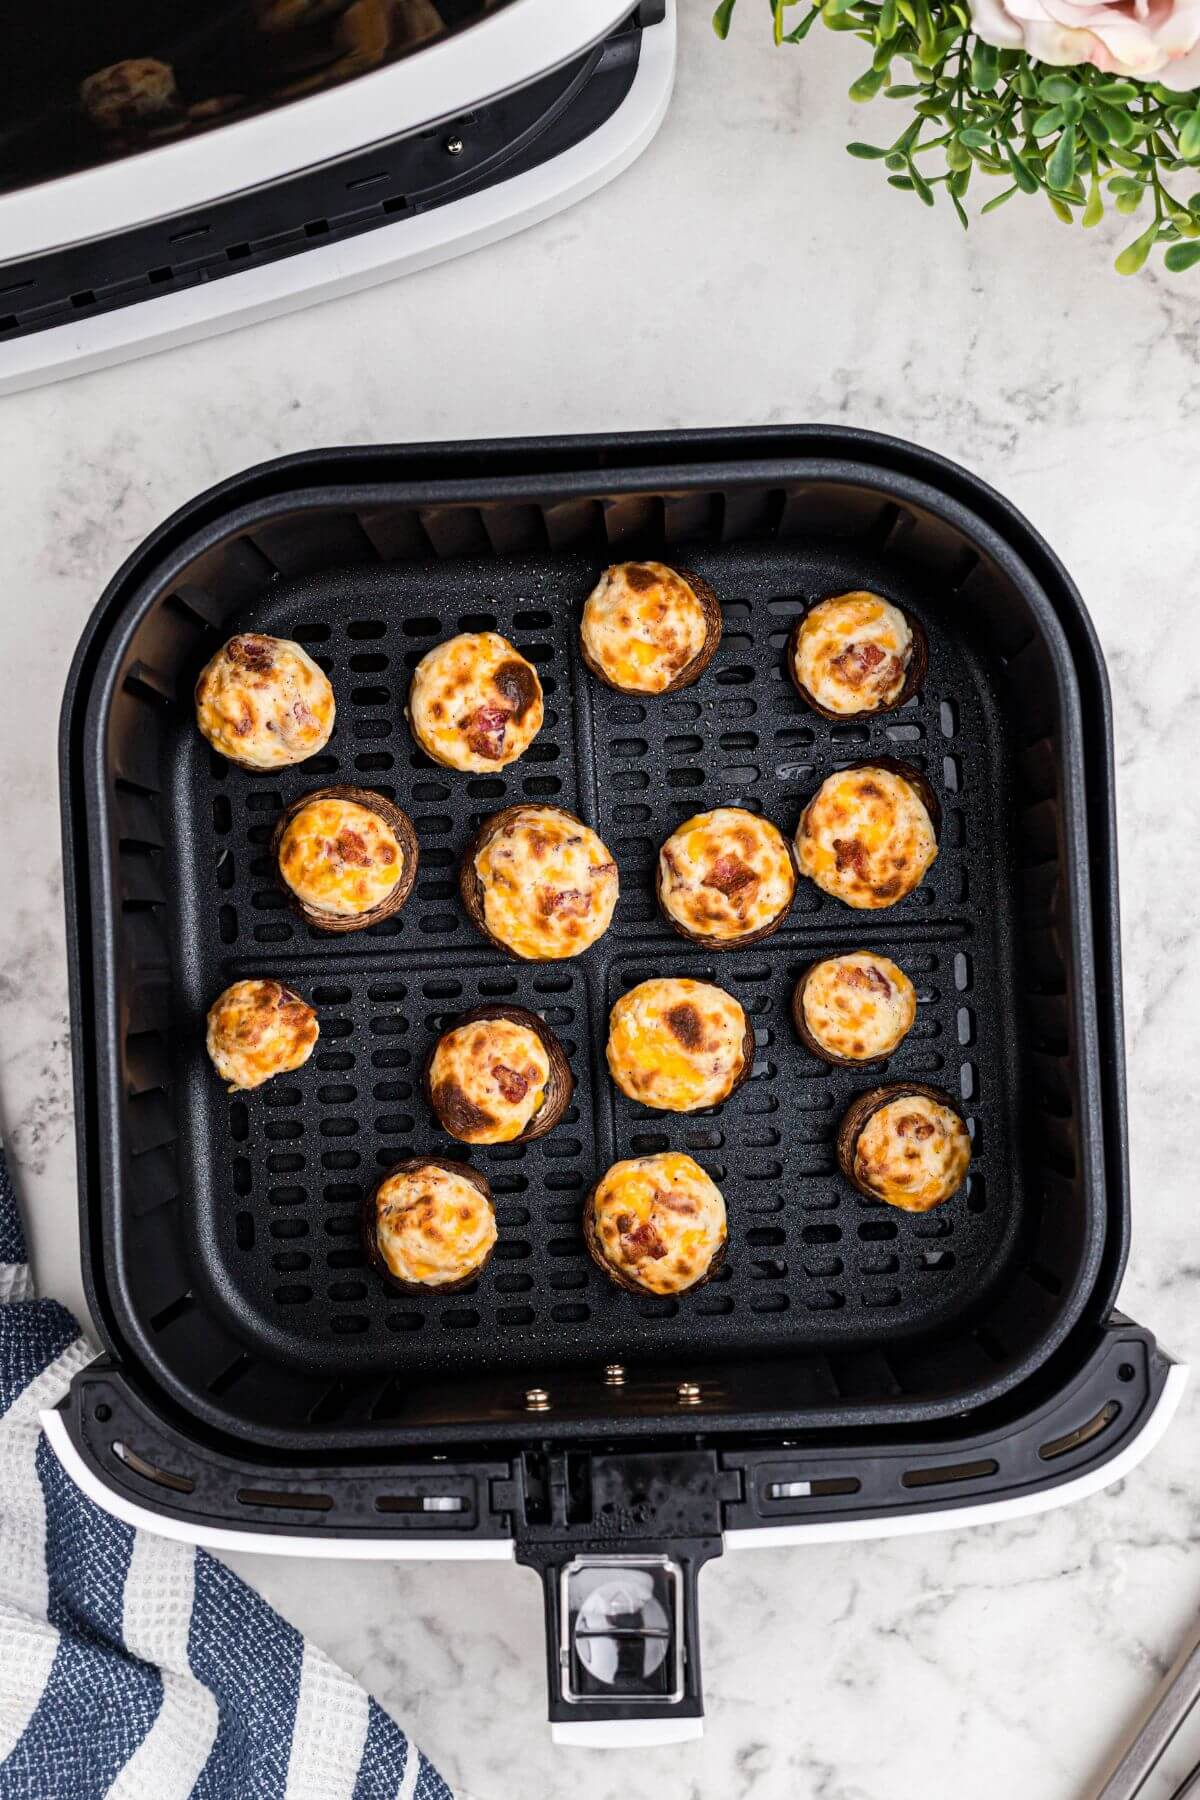 Golden brown mushrooms stuffed with cream cheese, cheddar cheese, bacon crumbles, in the air fryer basket after being cooked. 